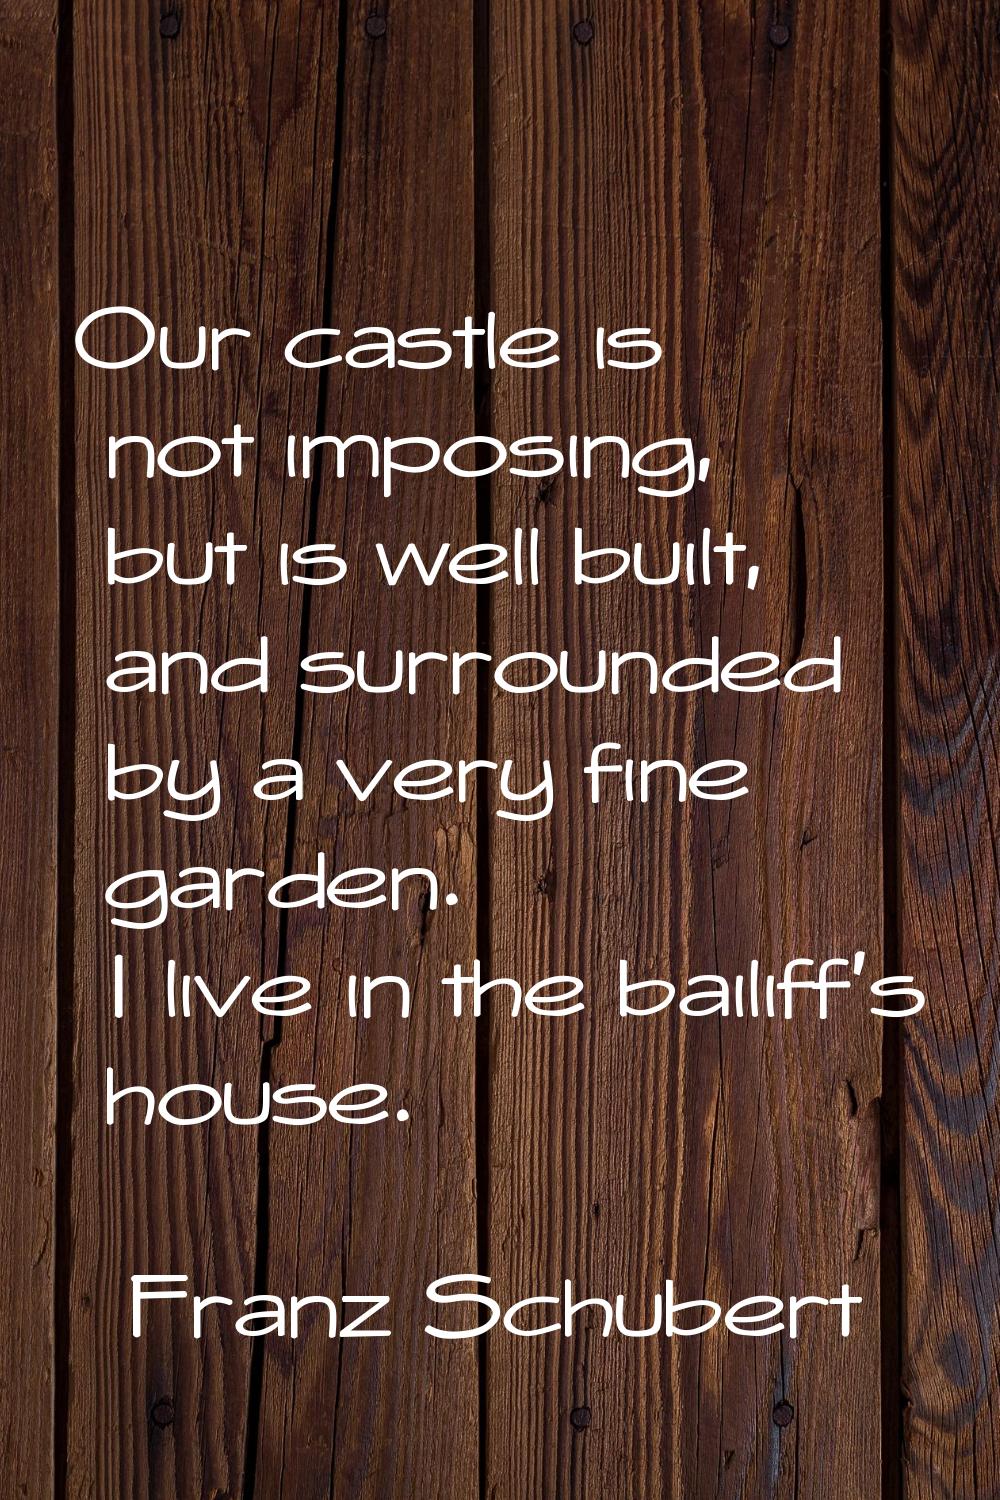 Our castle is not imposing, but is well built, and surrounded by a very fine garden. I live in the 